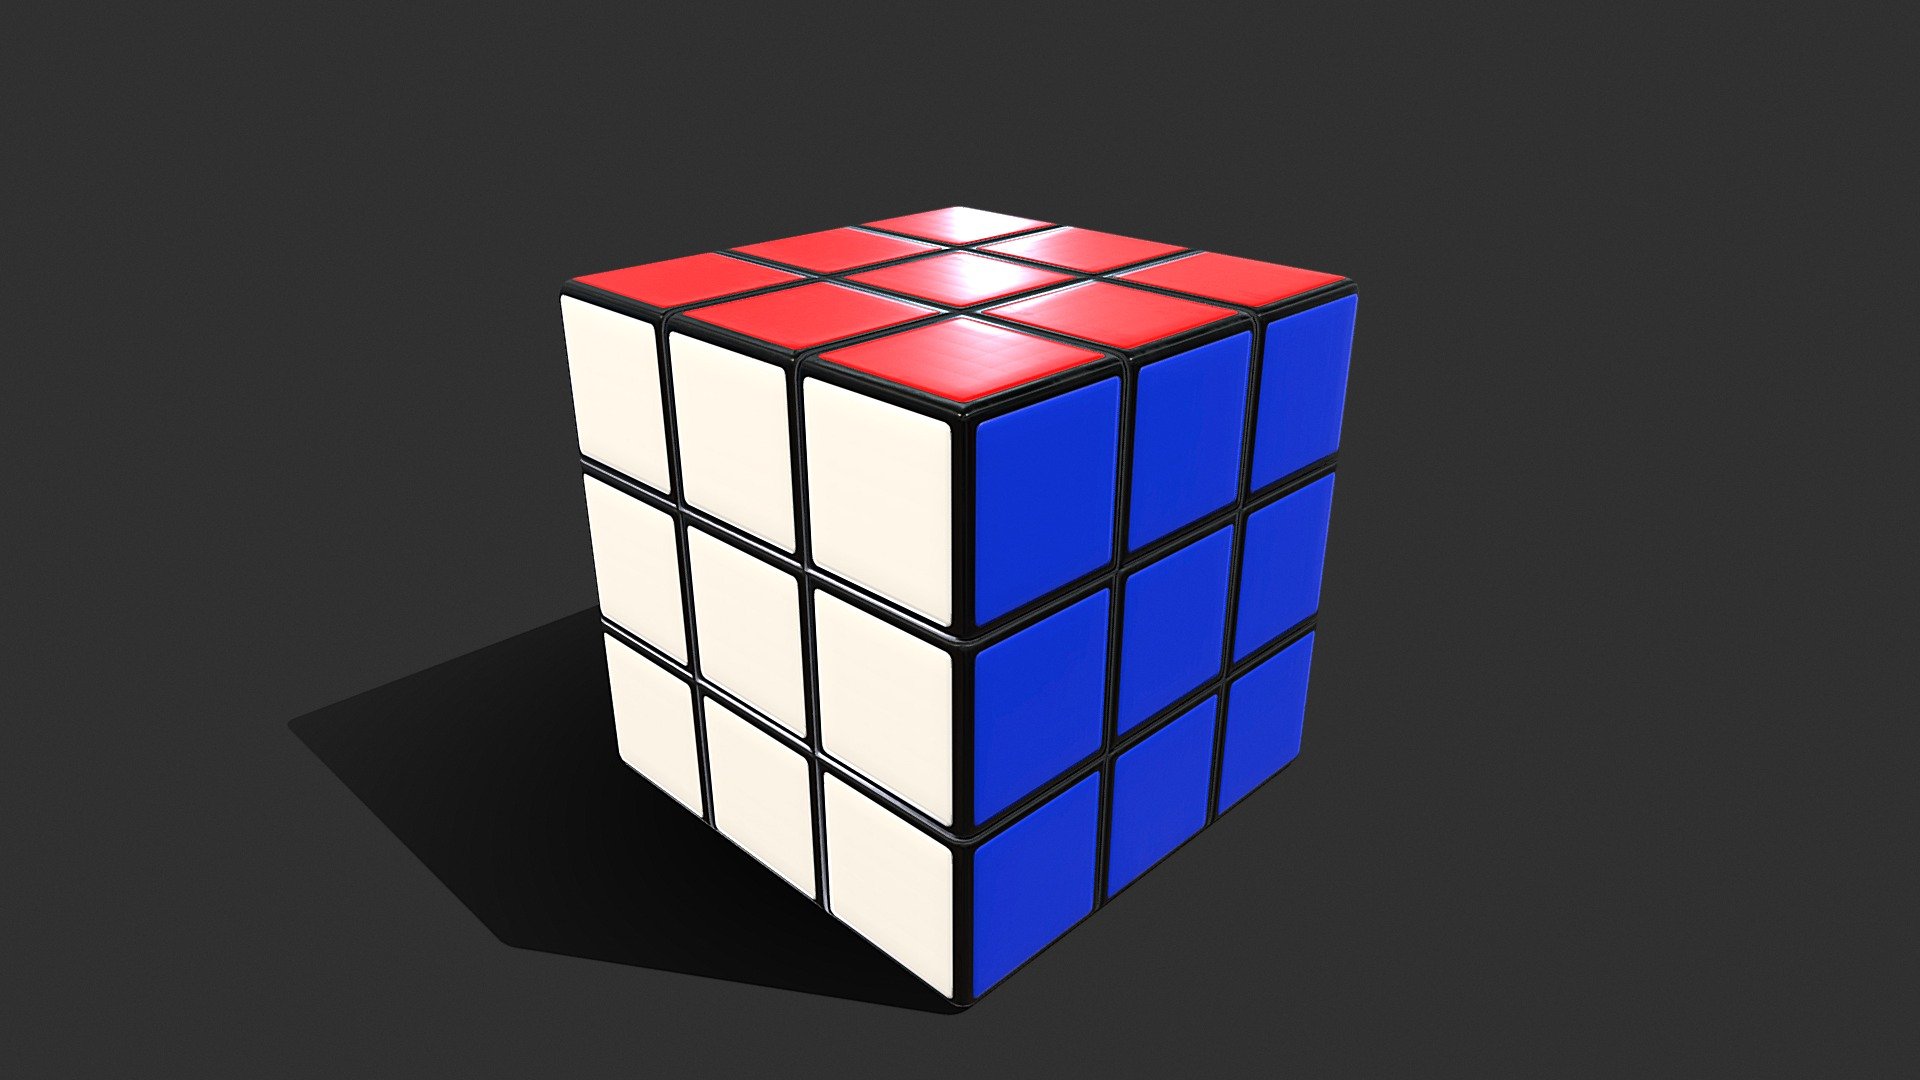 3D model of Rubik's Cube Low Poly PBR
- 4k Resolution of textures
- Originally created with 3ds Max 2018 
- Textured created with Substance Painter 


Texture Set: 
Diffuse, Base Color, IOR, gloss, heigh, ior, normal, reflection, specular, AO, metallic, roughness
Special notes: 
.fbx format is recommended for import in other 3d software. If your software doesn't support .fbx format, please use 3ds format; .obj, format was exported from 3ds Max. 
The geometry for .obj format is set to tris.
 - Rubik's Cube Low Poly PBR - Buy Royalty Free 3D model by danielmikulik 3d model